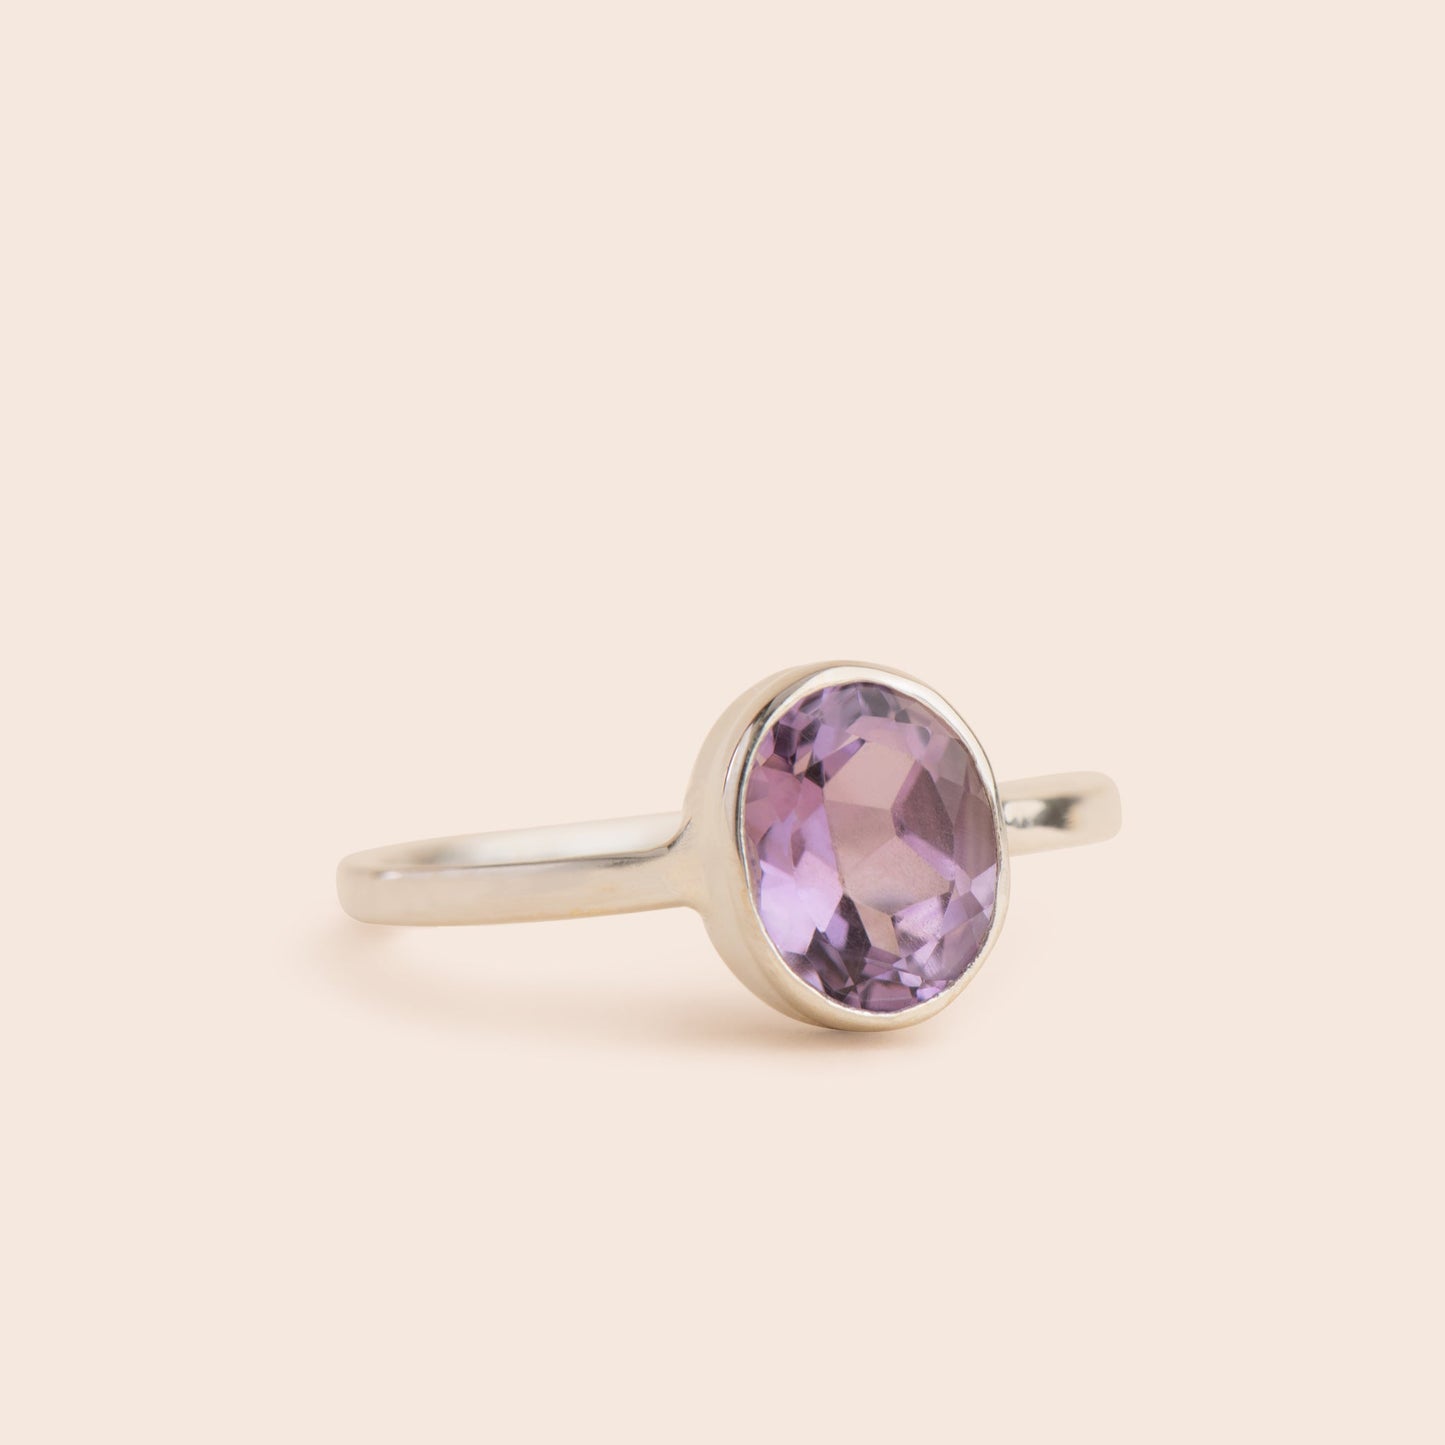 Load image into Gallery viewer, Luminous amethyst stone set in an oval shape on a gleaming sterling silver band, a timeless piece of jewelry to add to your collection.
